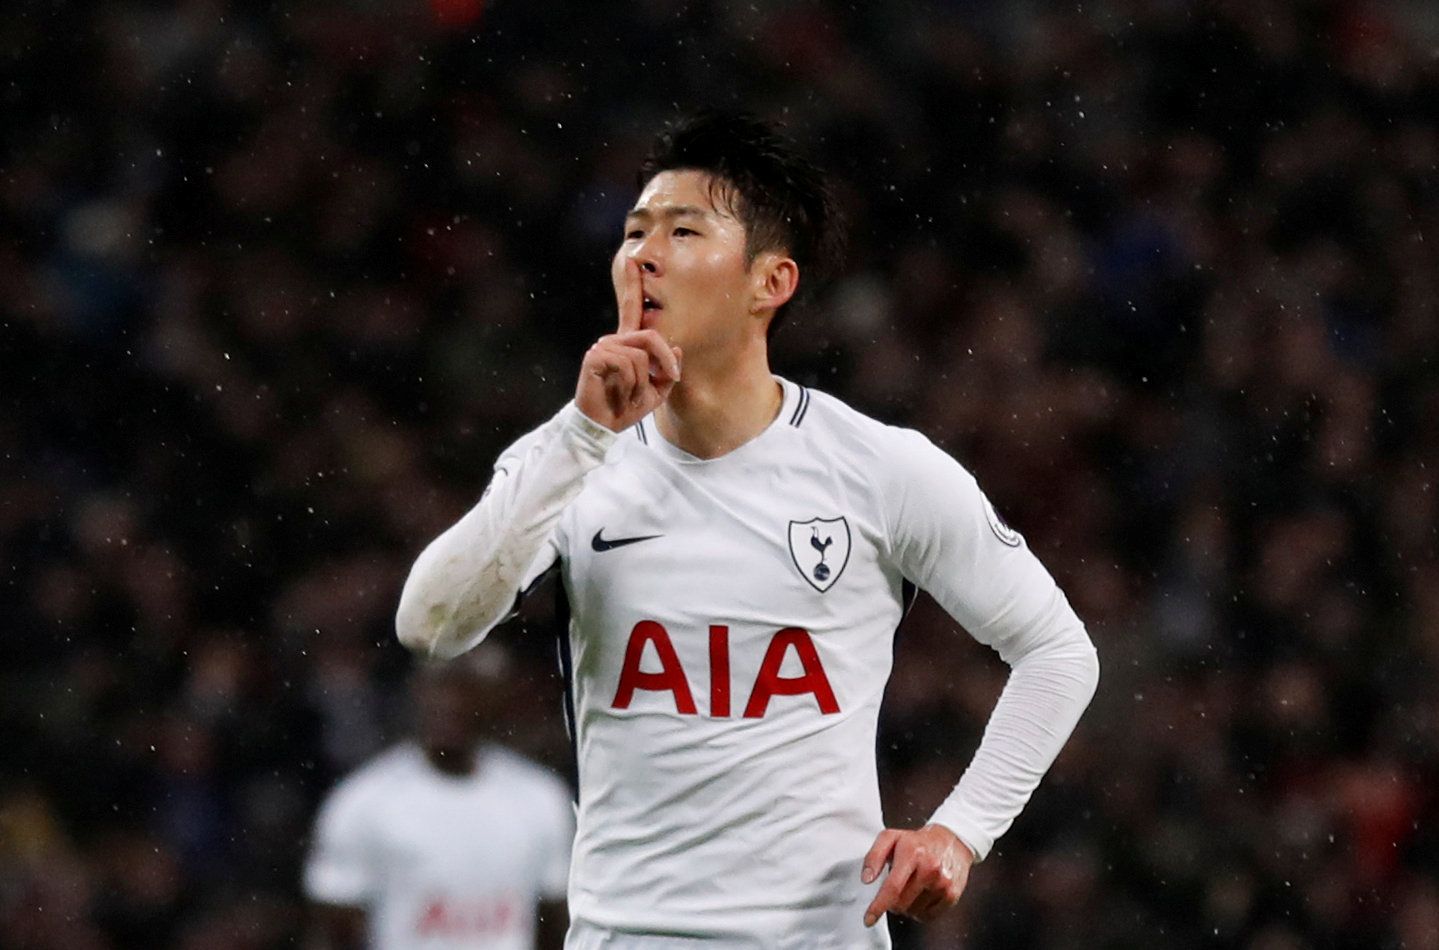 Soccer Football - Premier League - Tottenham Hotspur vs West Ham United - Wembley Stadium, London, Britain - January 4, 2018   Tottenham's Son Heung-min celebrates scoring their first goal    Action Images via Reuters/Matthew Childs    EDITORIAL USE ONLY. No use with unauthorized audio, video, data, fixture lists, club/league logos or "live" services. Online in-match use limited to 75 images, no video emulation. No use in betting, games or single club/league/player publications.  Please contact 